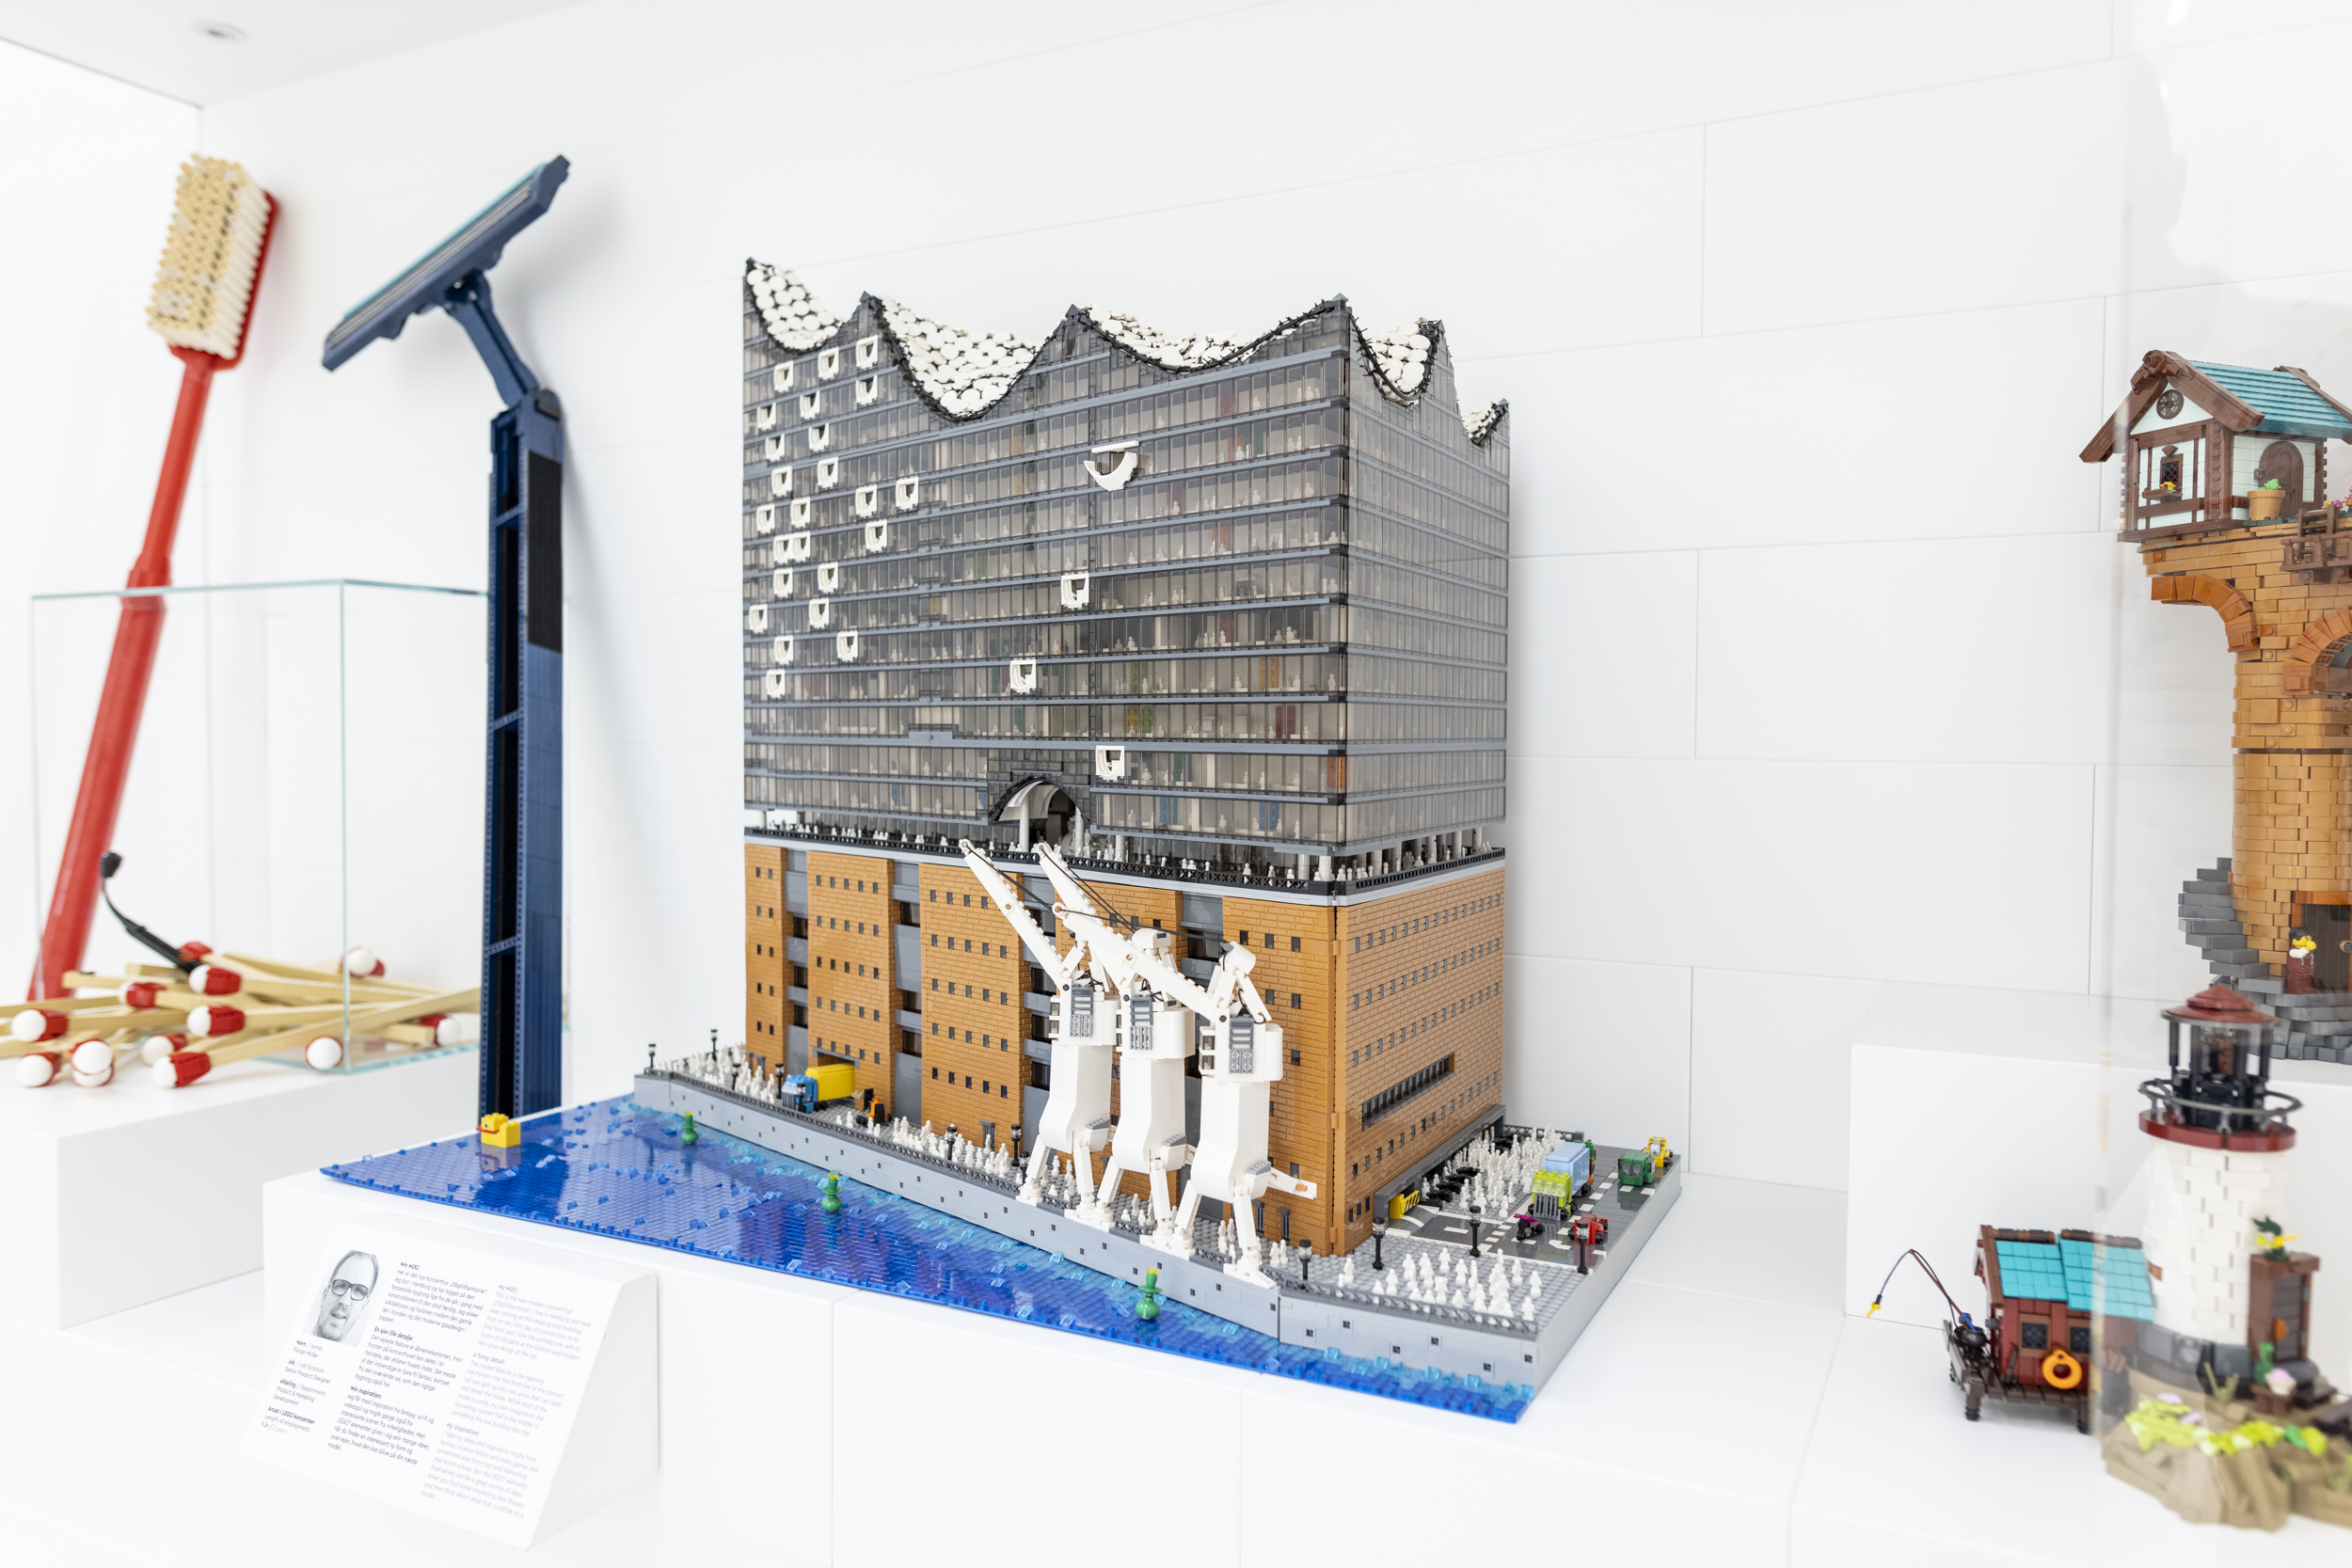 Lego architects and super-fans on creating the perfect miniature world